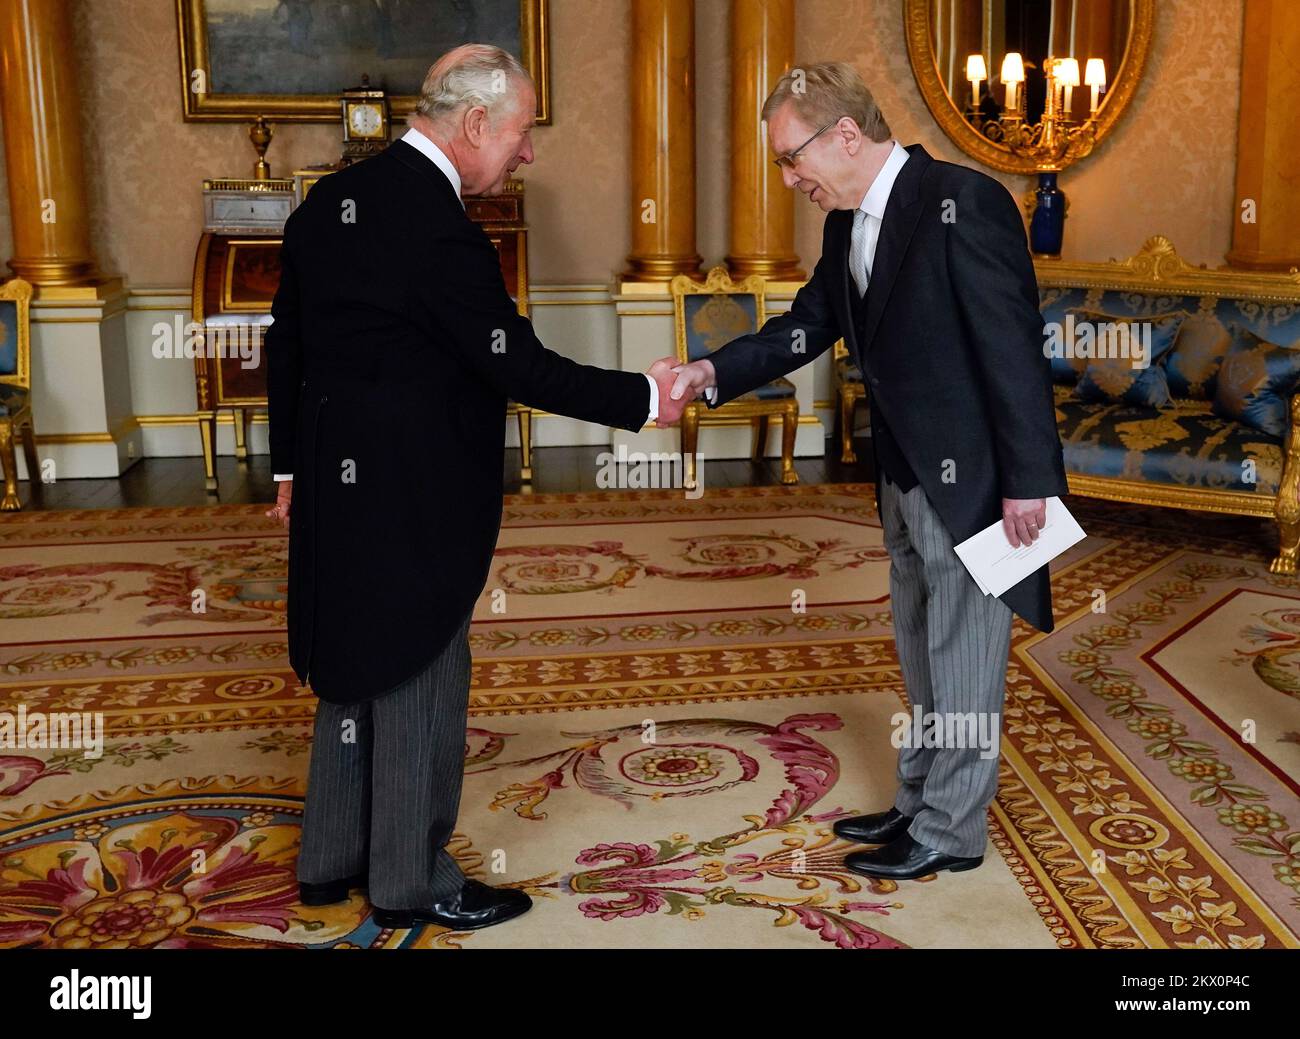 King Charles III receives Georges Friden, Ambassador to the UK from the Grand Duchy of Luxembourg to the Court of St James's, as he presents his Letters of Recall of his predecessor and his own letters of Credence during an audience at Buckingham Palace, London. Picture date: Wednesday November 30, 2022. Stock Photo